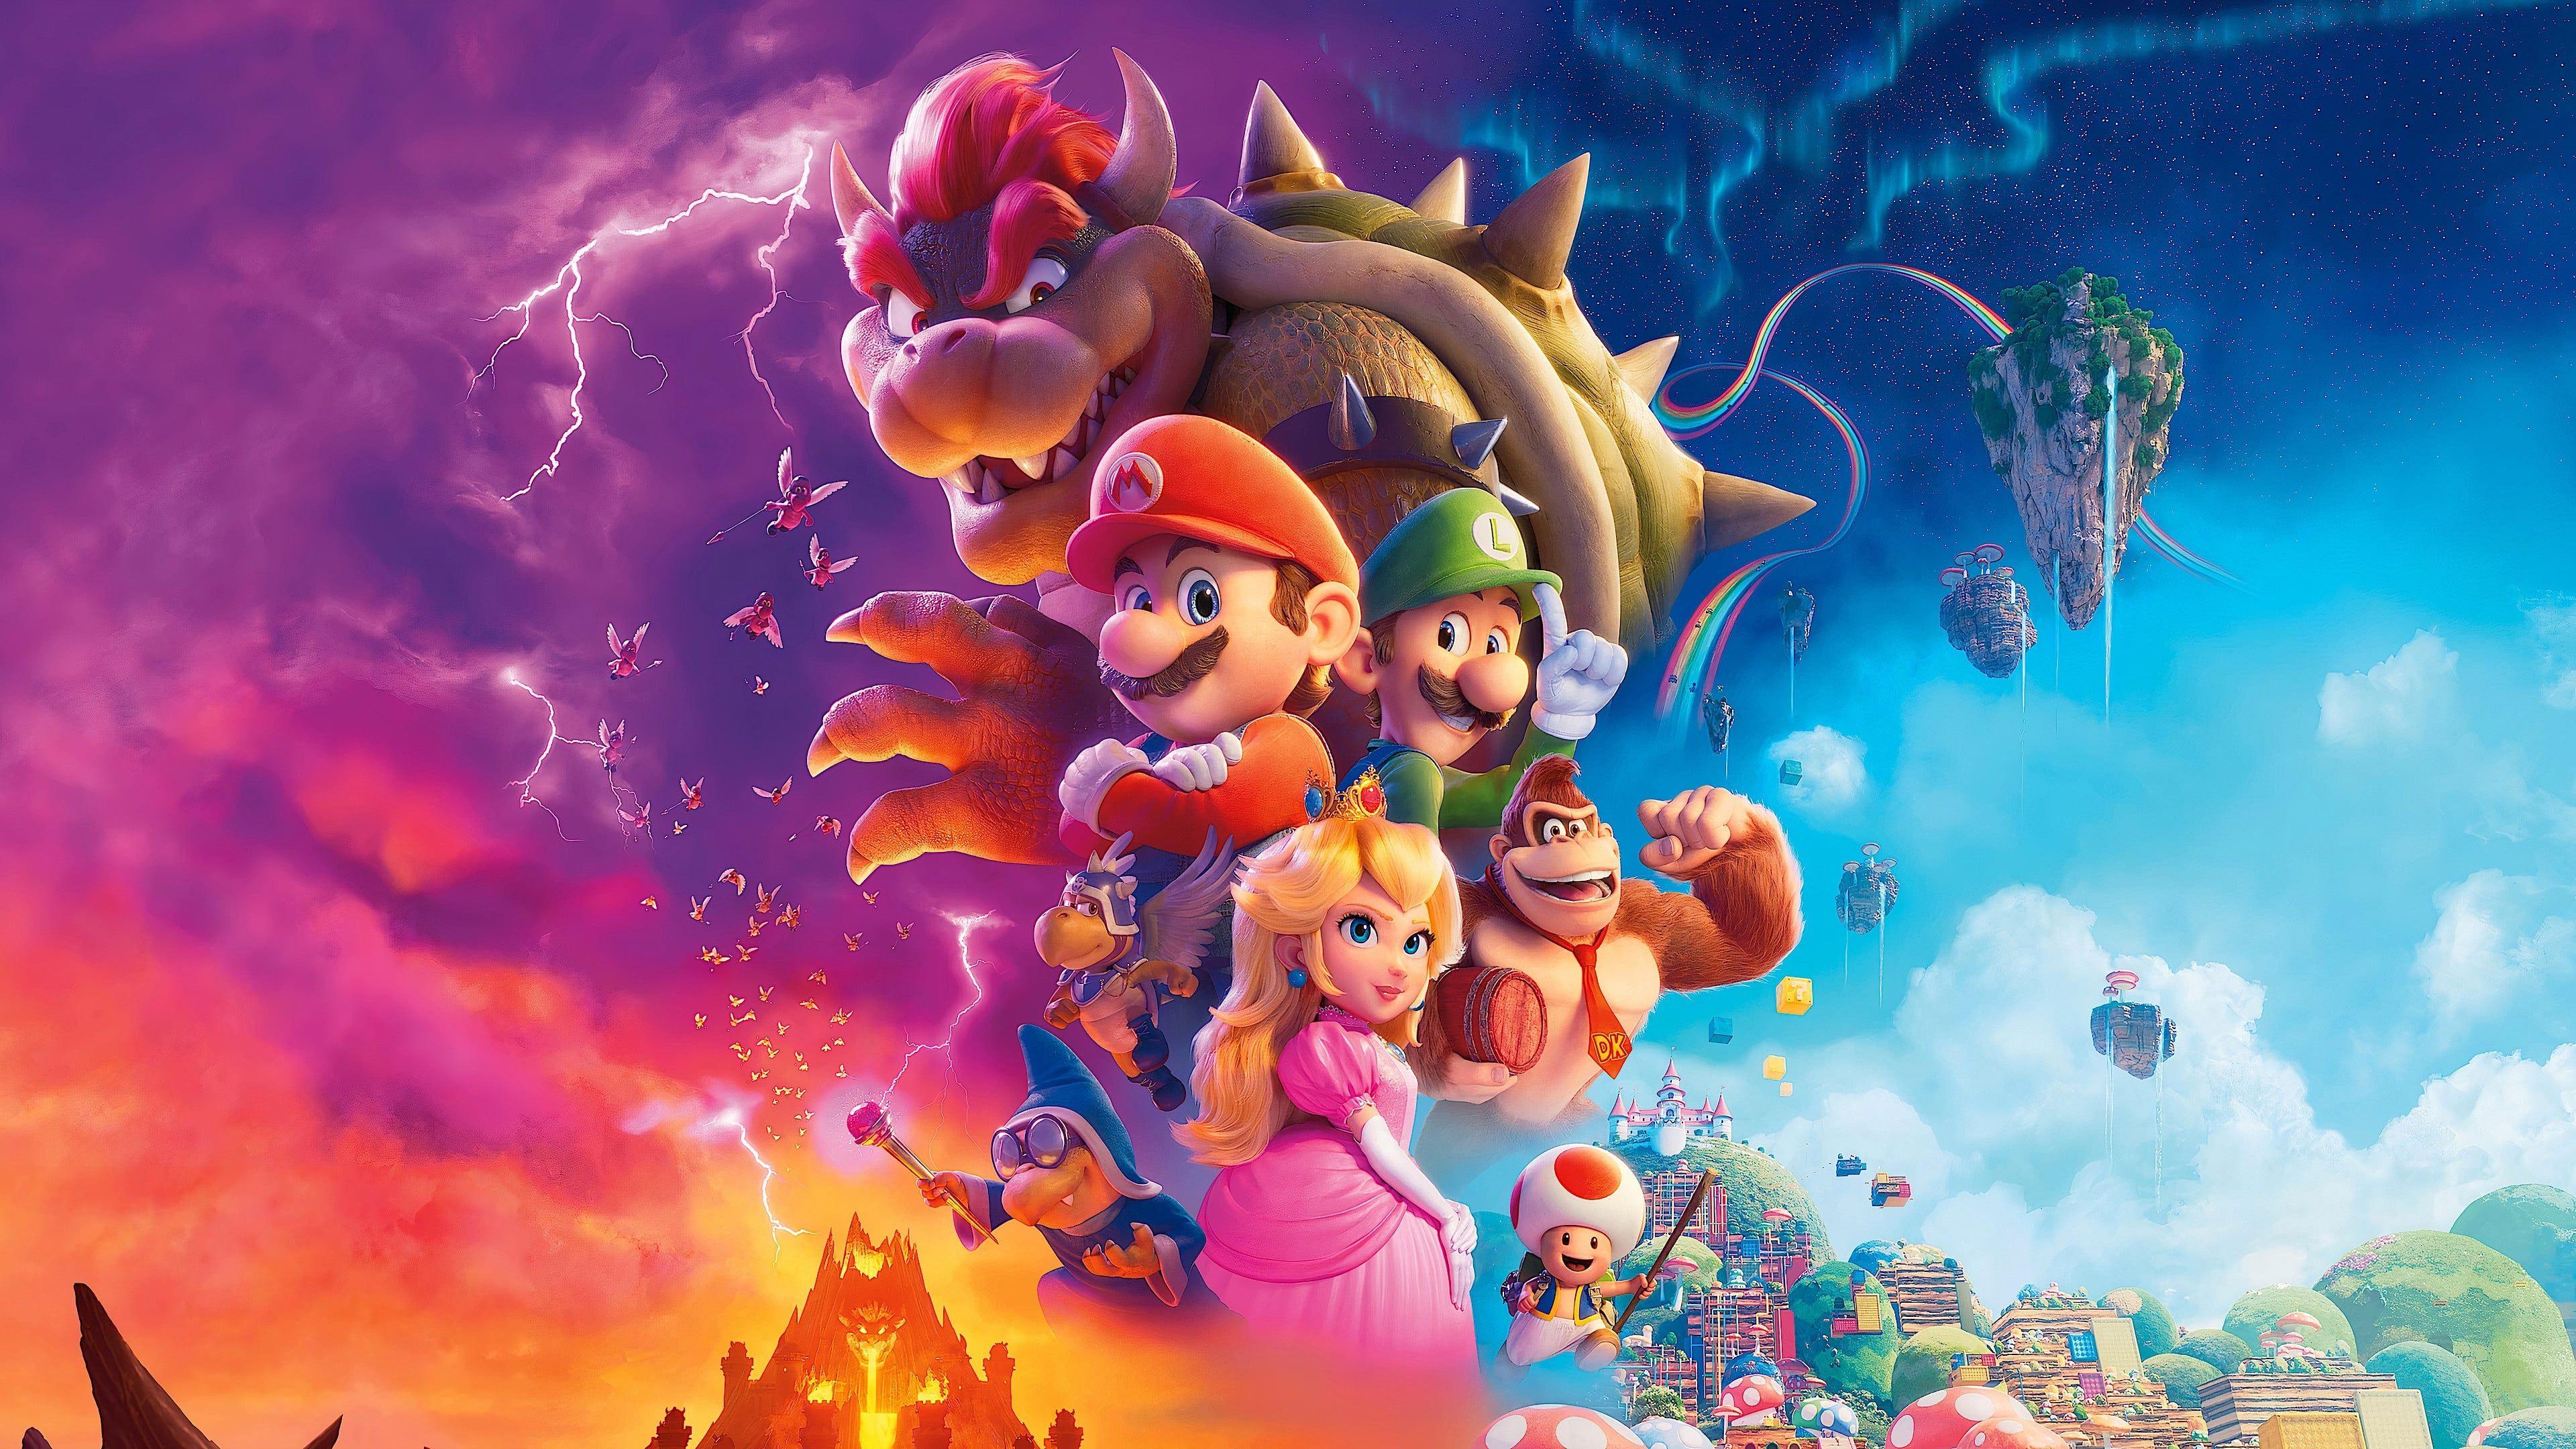 Promotional image for 'The Super Mario Bros. Movie' featuring characters such as Mario, Princess Peach, Donkey Kong, and more.